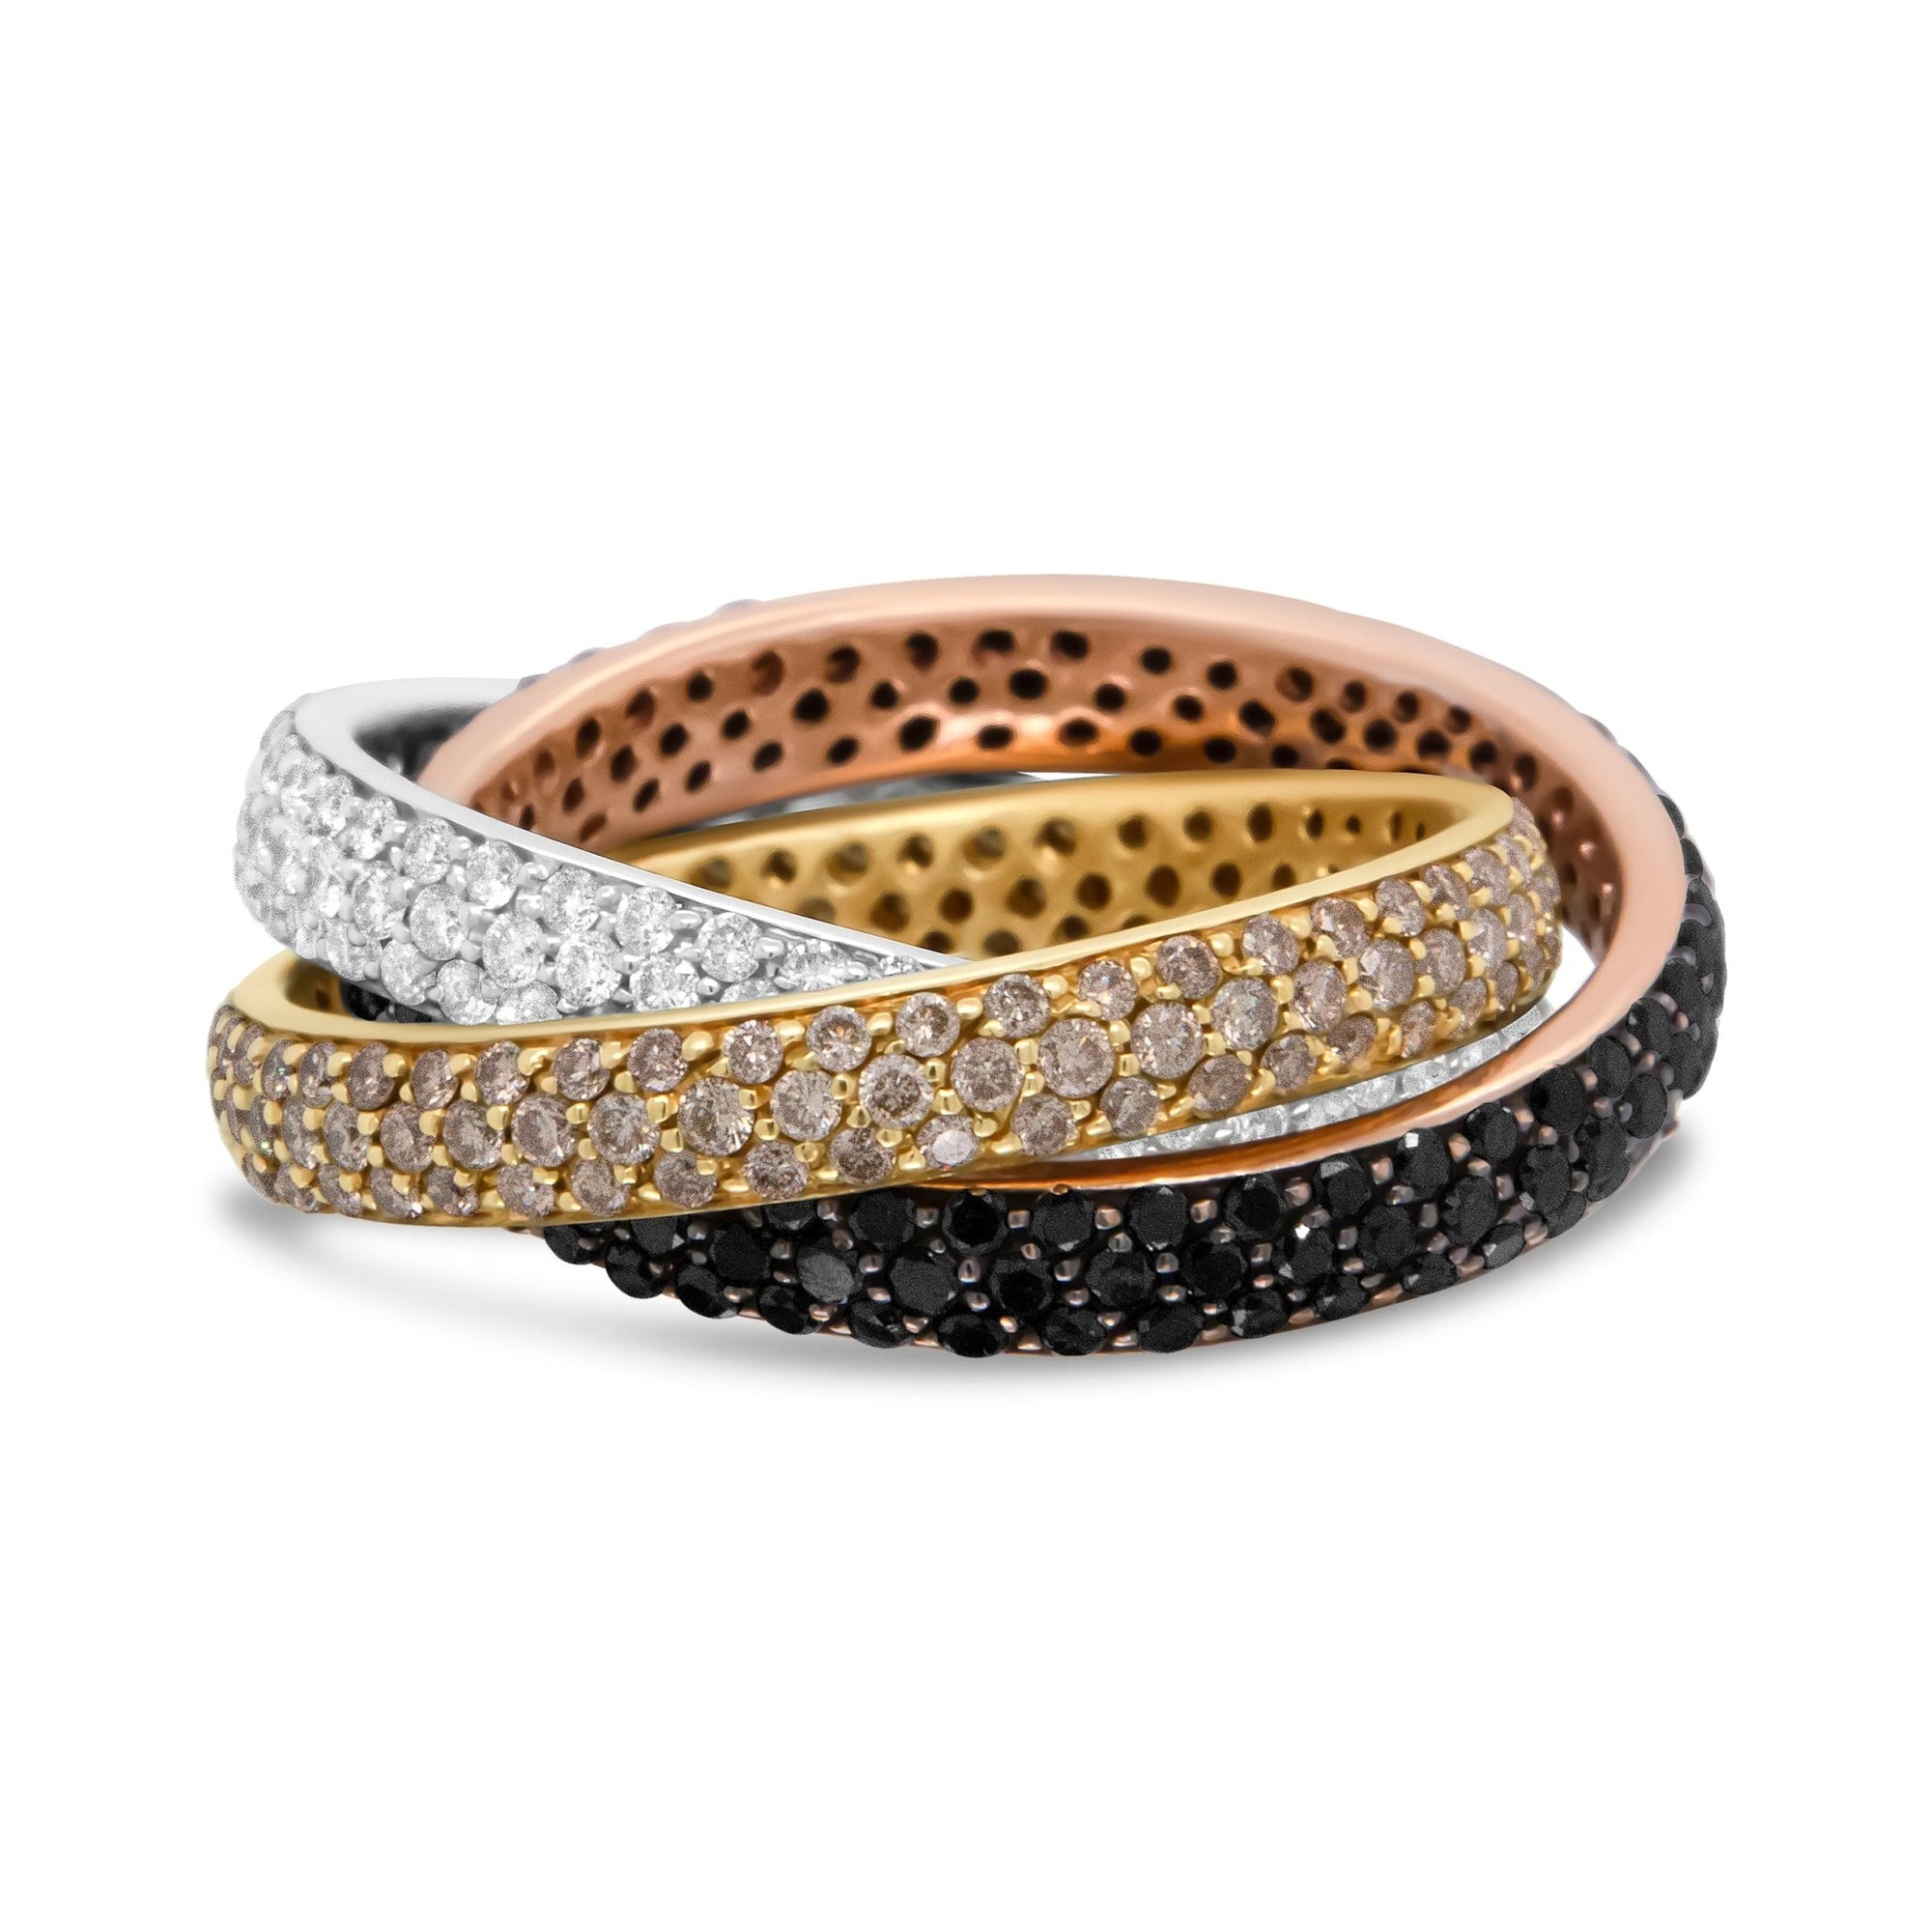 18K Tri-Color Gold 3 5/8 Cttw Diamond Interlocking Stackable Band Ring Set (Champagne, Black, and F-G Color, VS1-VS2 Clarity) - Ring Size 7.5 - LinkagejewelrydesignLinkagejewelrydesign